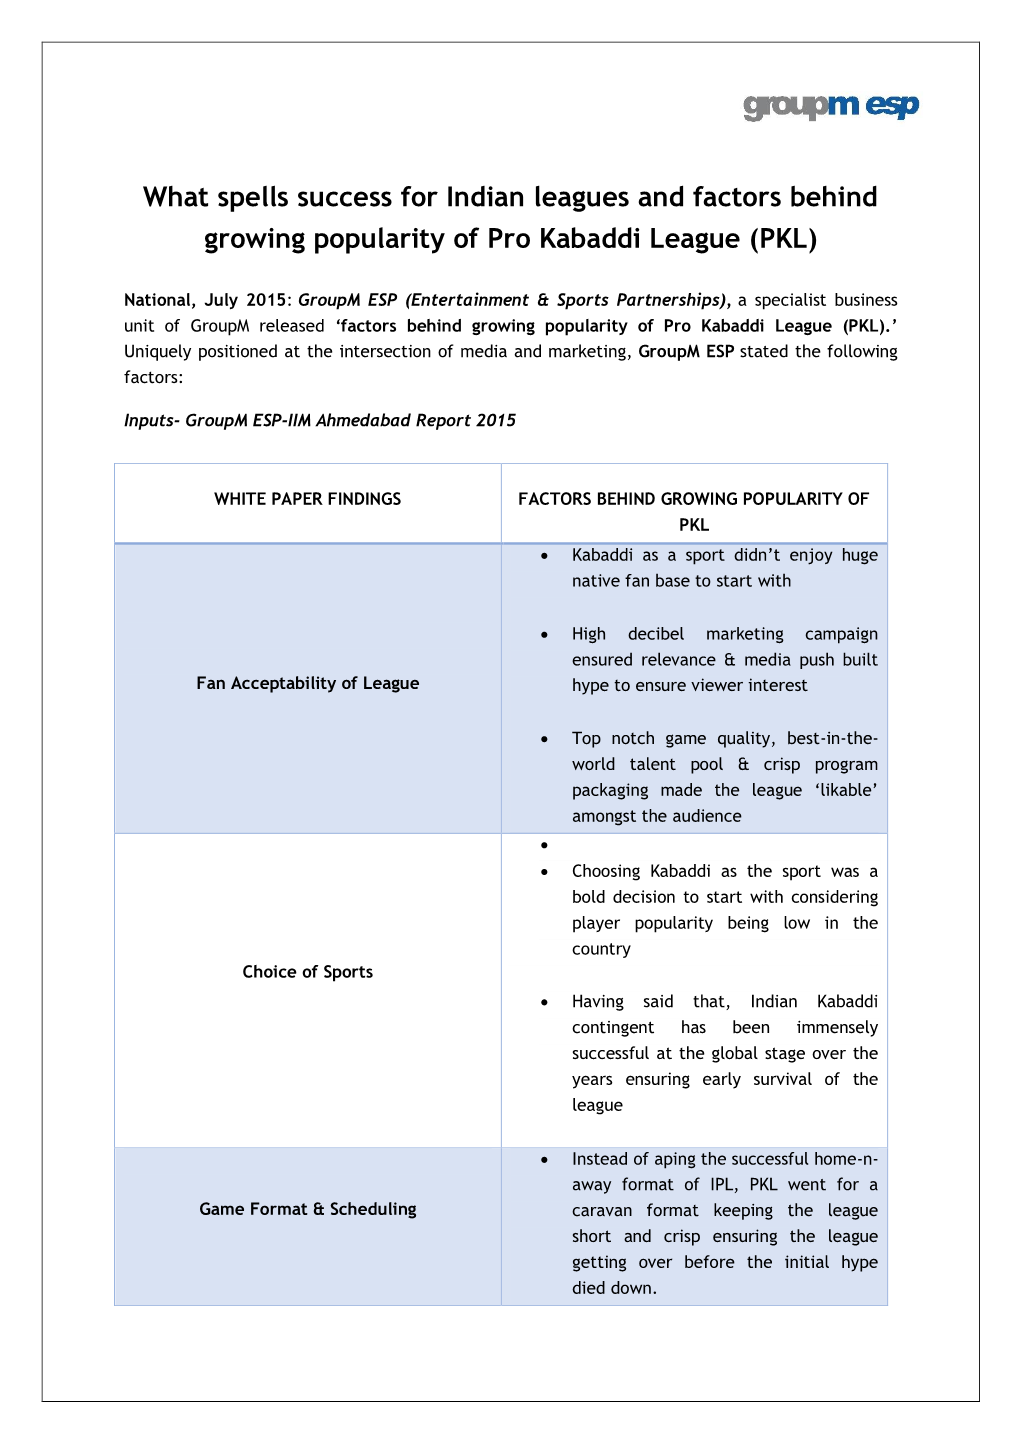 What Spells Success for Indian Leagues and Factors Behind Growing Popularity of Pro Kabaddi League (PKL)